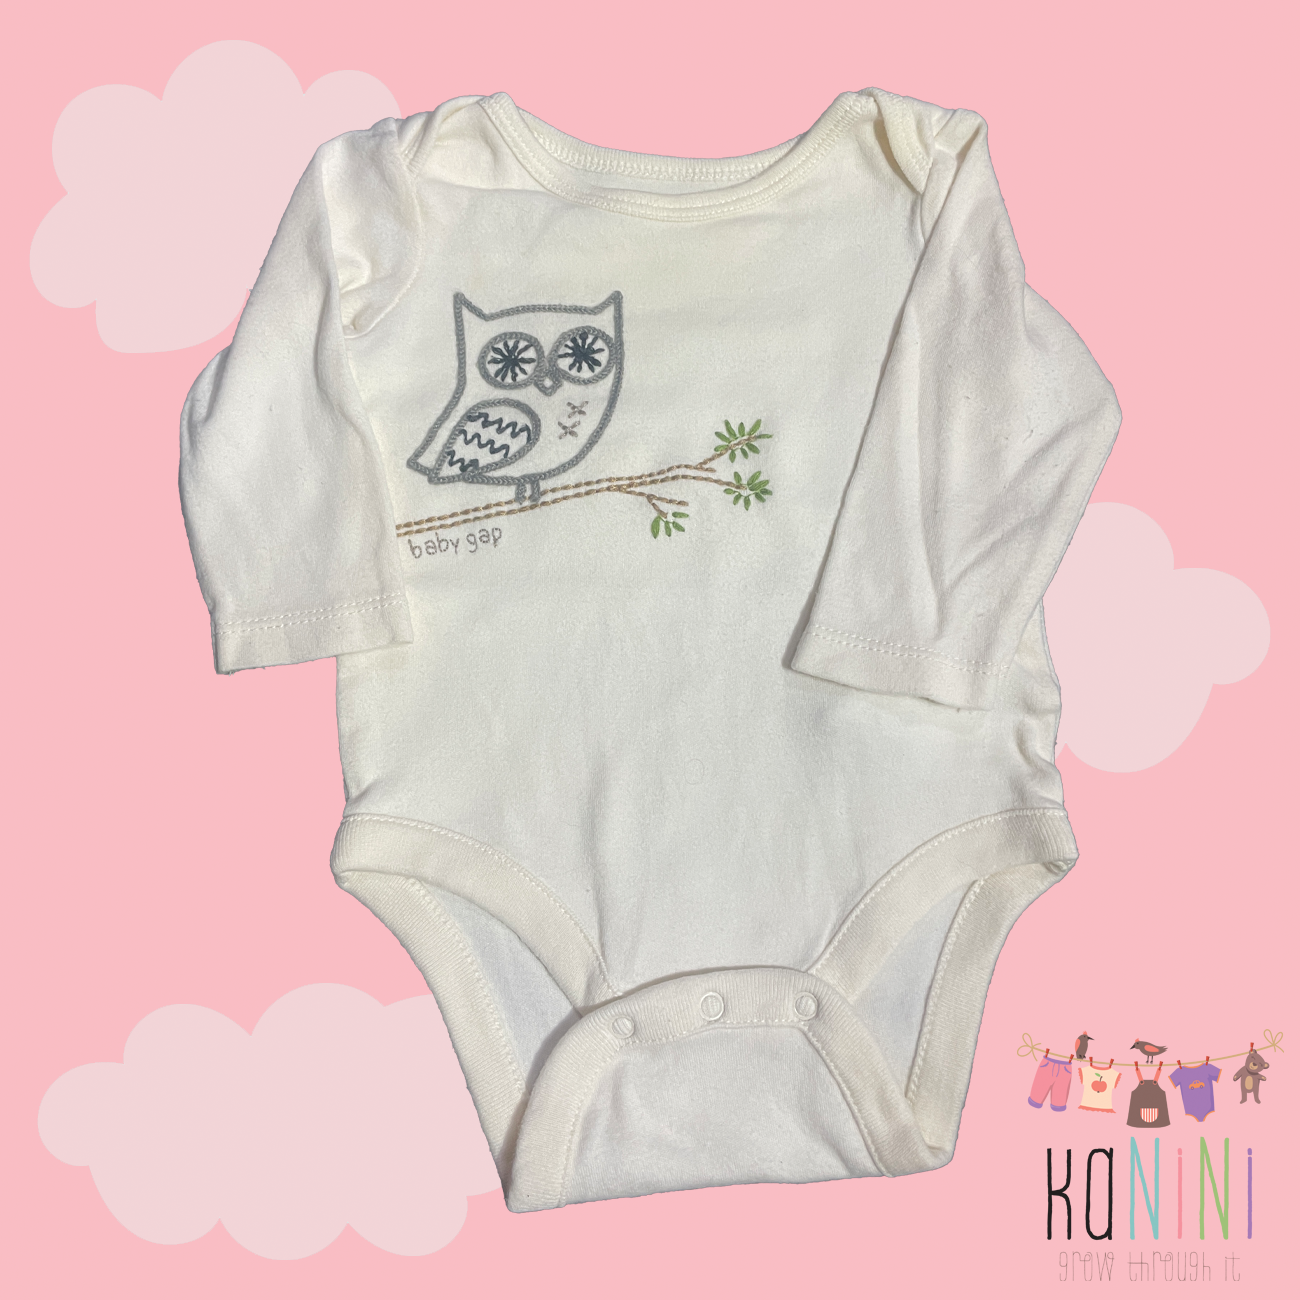 Featured image for “Baby GAP 0 - 3 Months Girls Long Sleeve Romper”